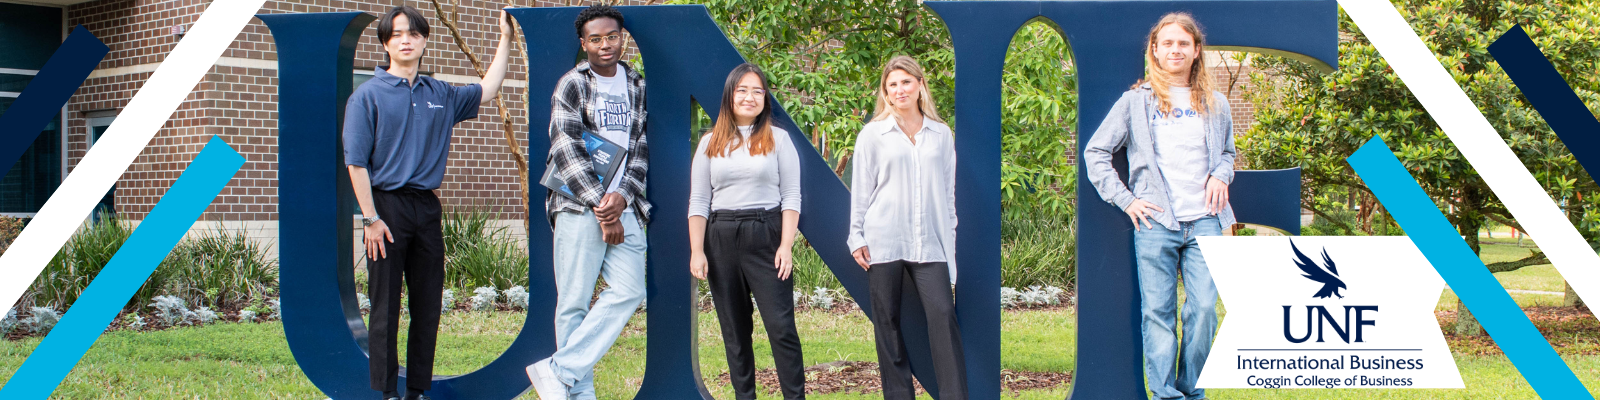 5 international business students standing next to a blue metal UNF sign with international business logo in blue in the bottom right corner 